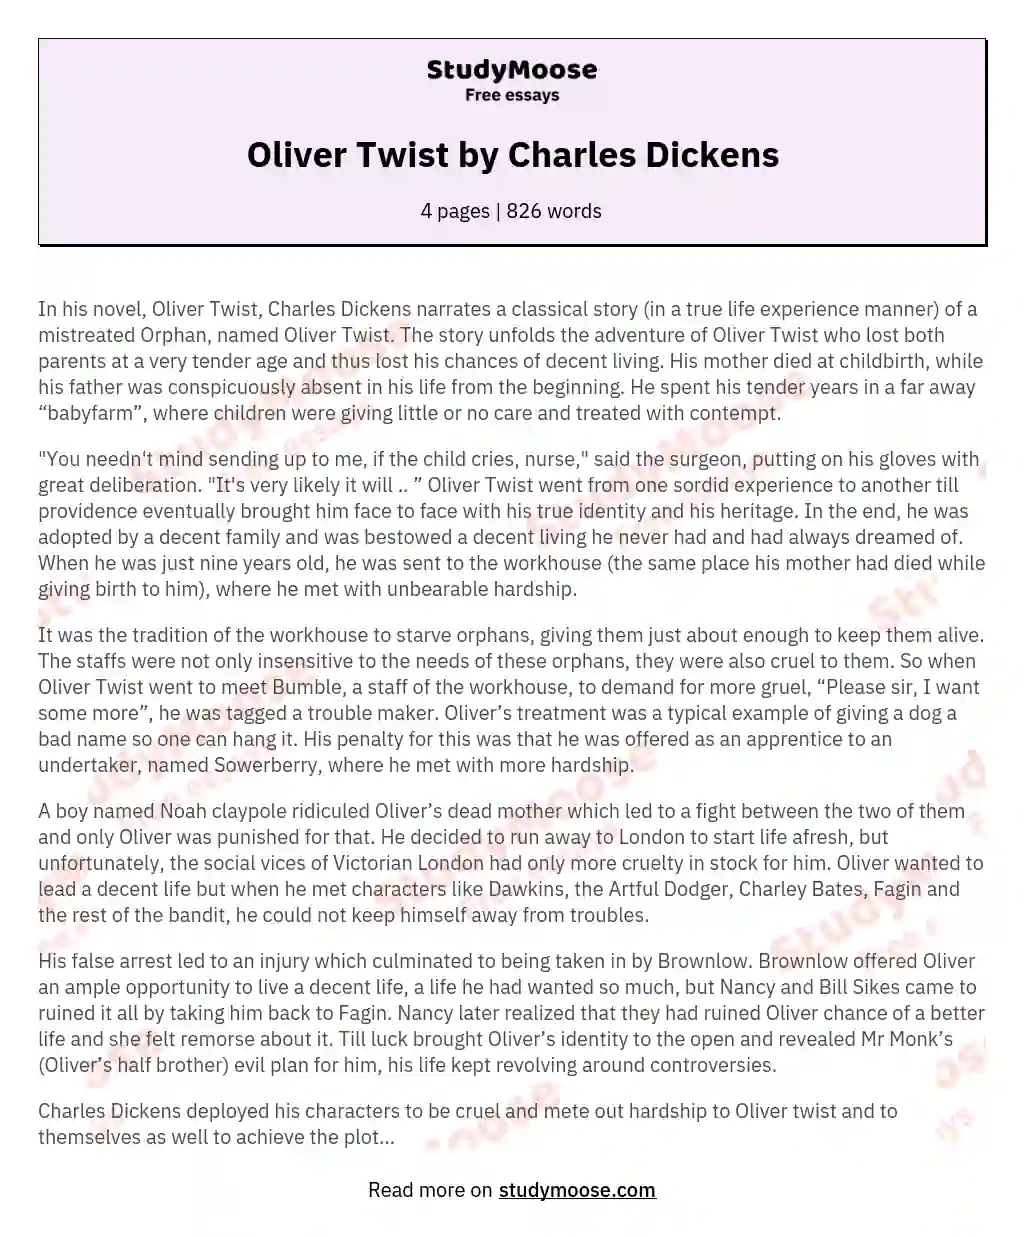 Oliver Twist by Charles Dickens essay